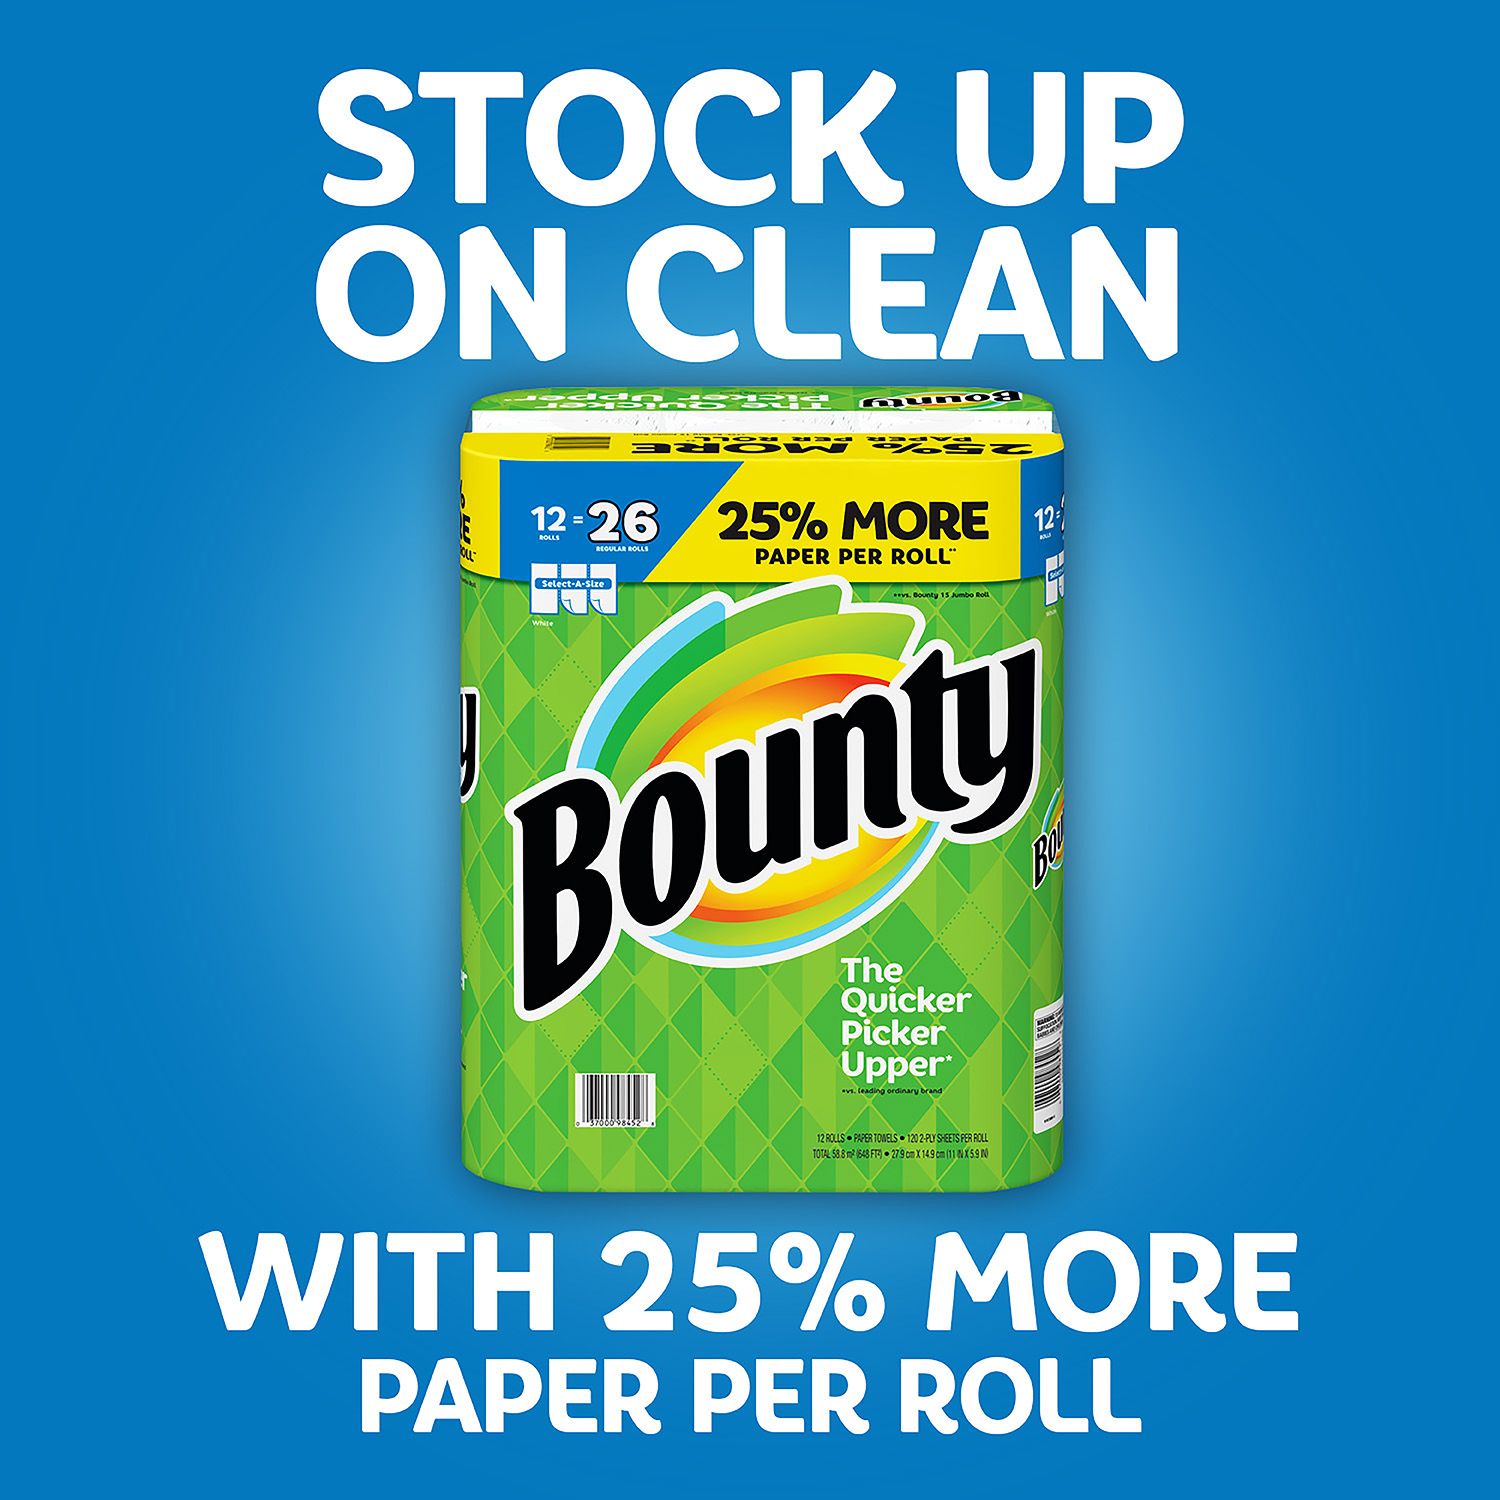 Bounty Select-A-Size Paper Towels, White - 12 pack